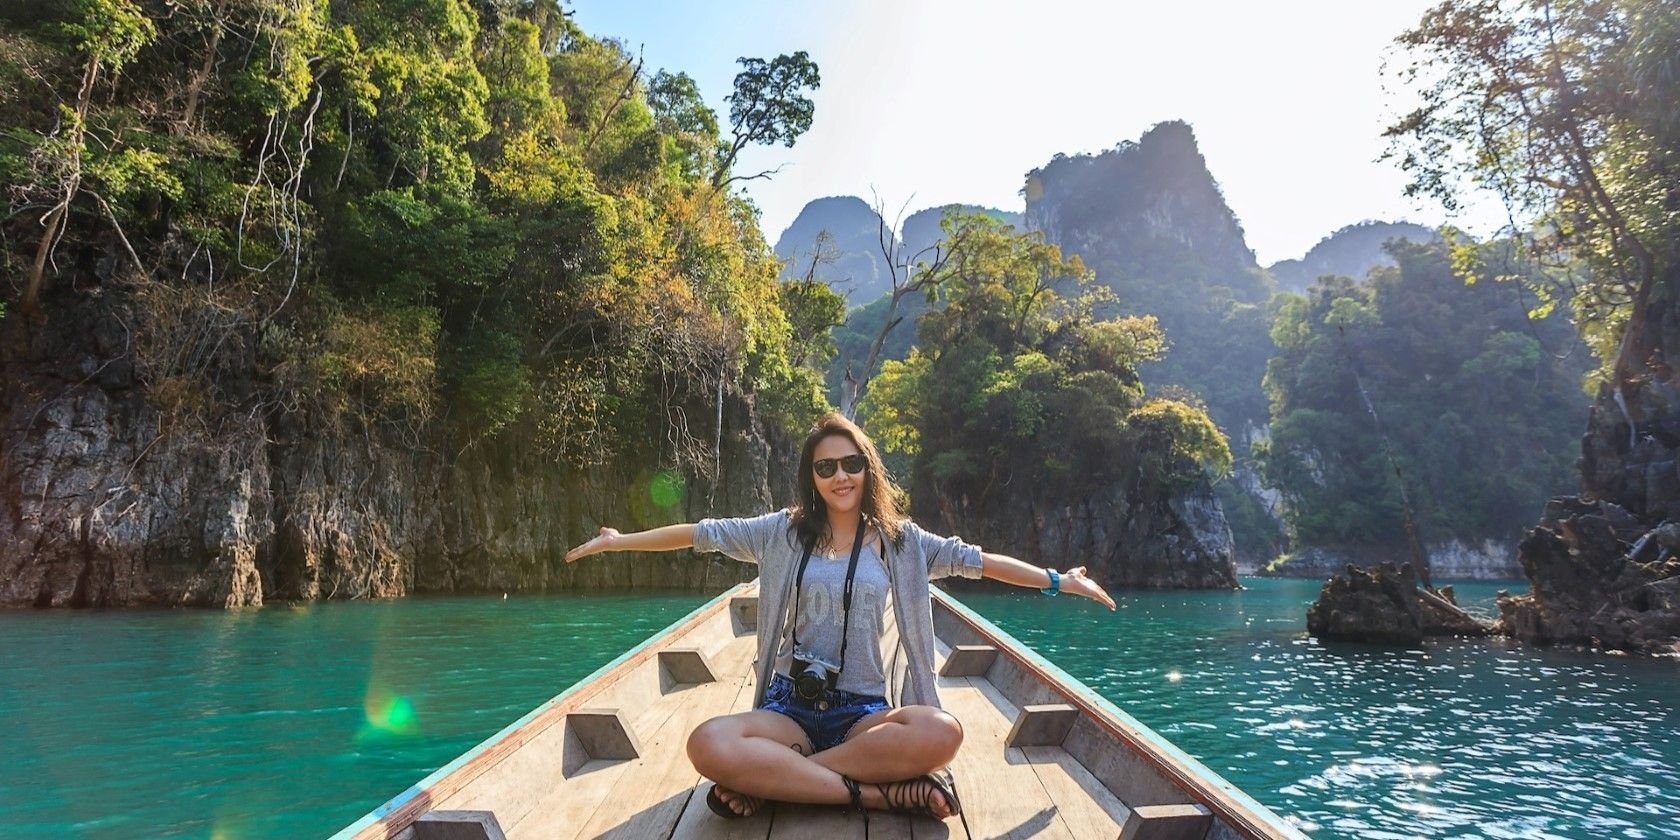 How to Look After Your Mental Health When Traveling: 7 Top Tips